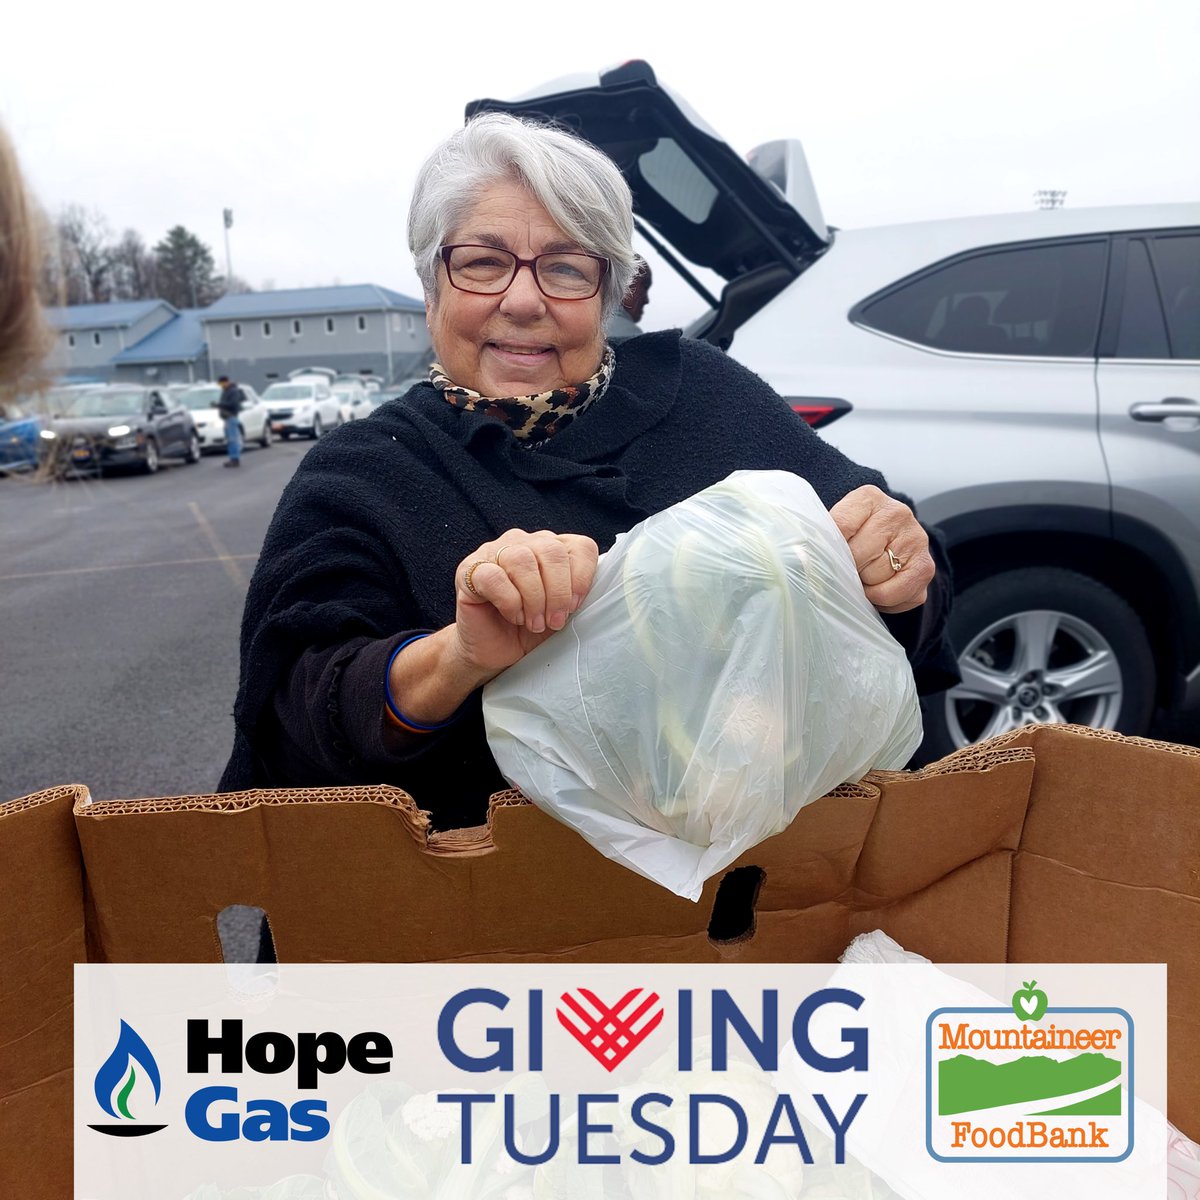 Today is the big day‼️❤️ Make an impact this #GivingTuesday! You can be the reason a family has food to share around the table this holiday season. Thanks to Hope Gas, your gift has double the impact. You can easily donate here: bit.ly/3QP7LZ1